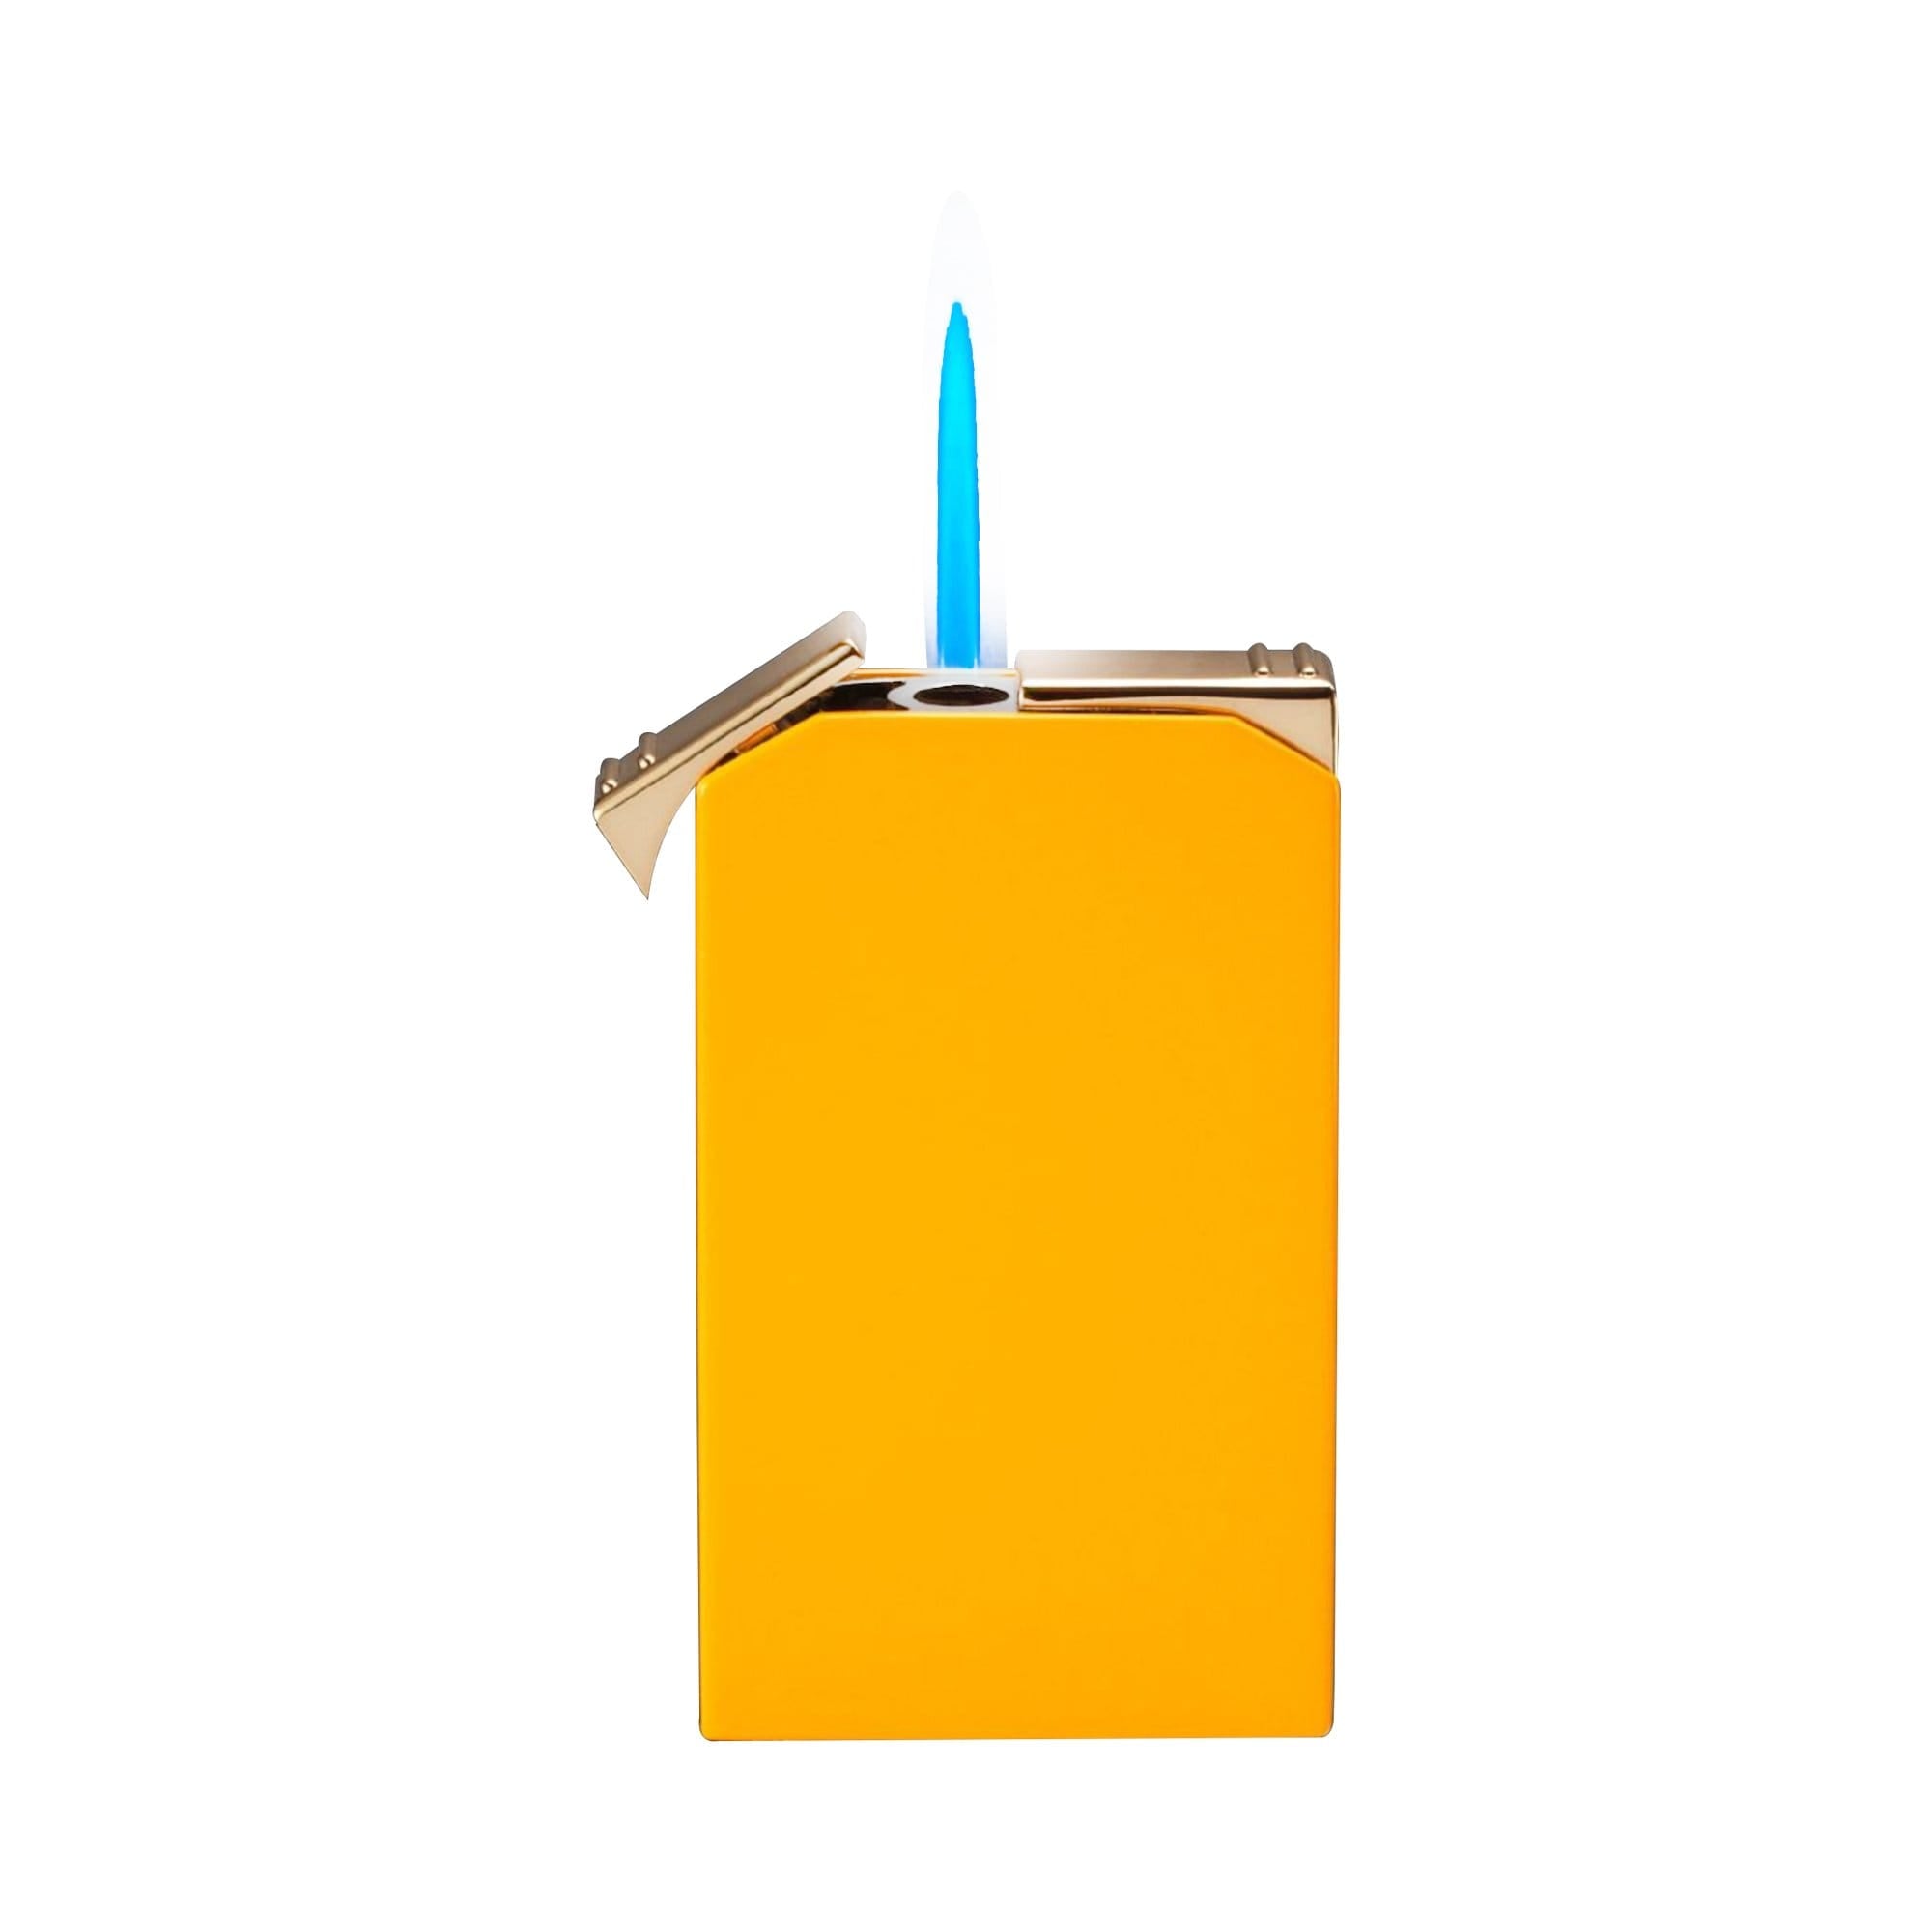 SIGLO ACCESSORIES Yellow Siglo Twin Flames Lighter - Checkers (shiny yellow)